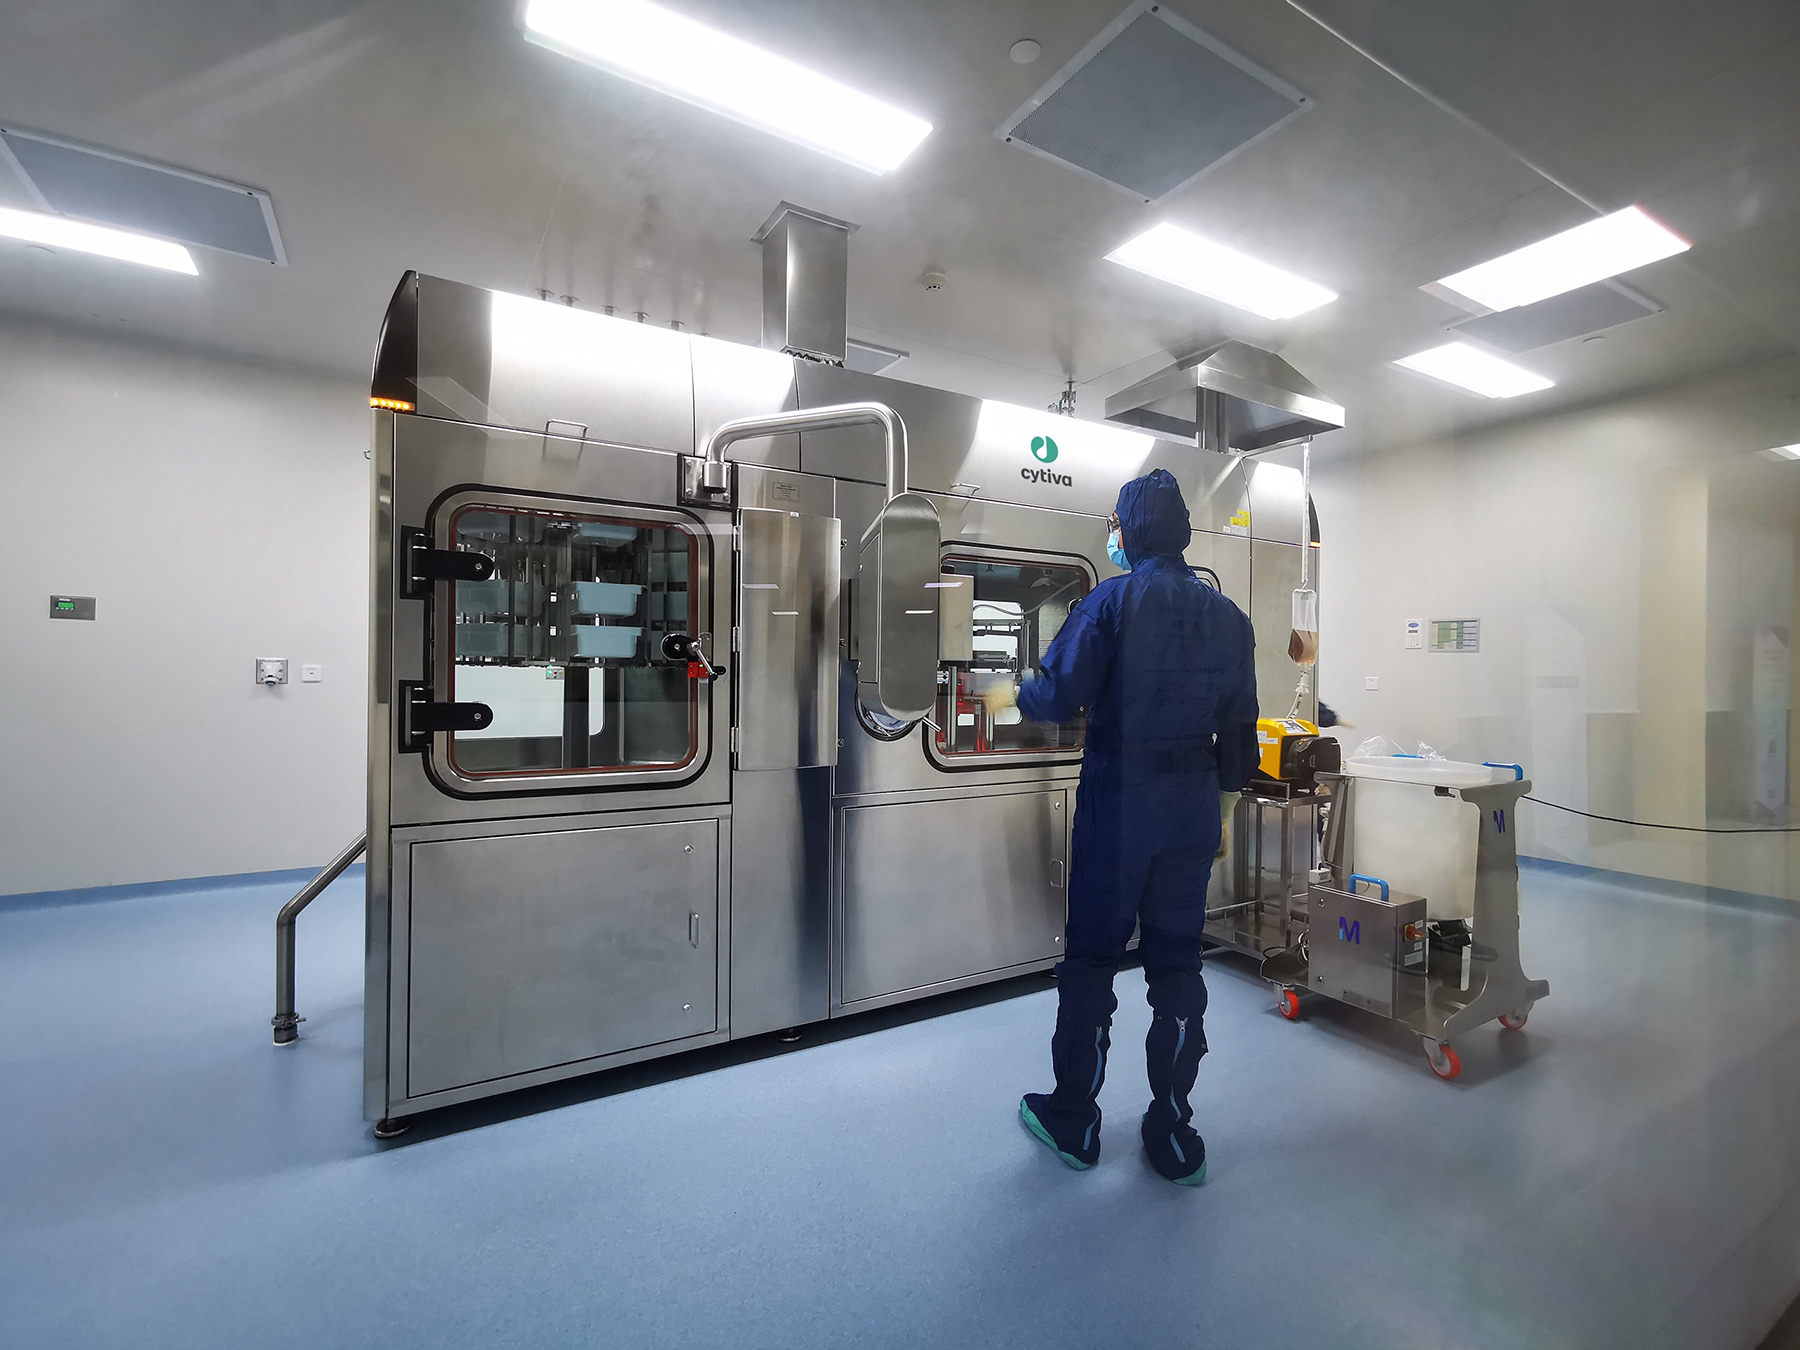 Cleanroom operator observes the optimal aseptic process inside the closed, robotic isolator.